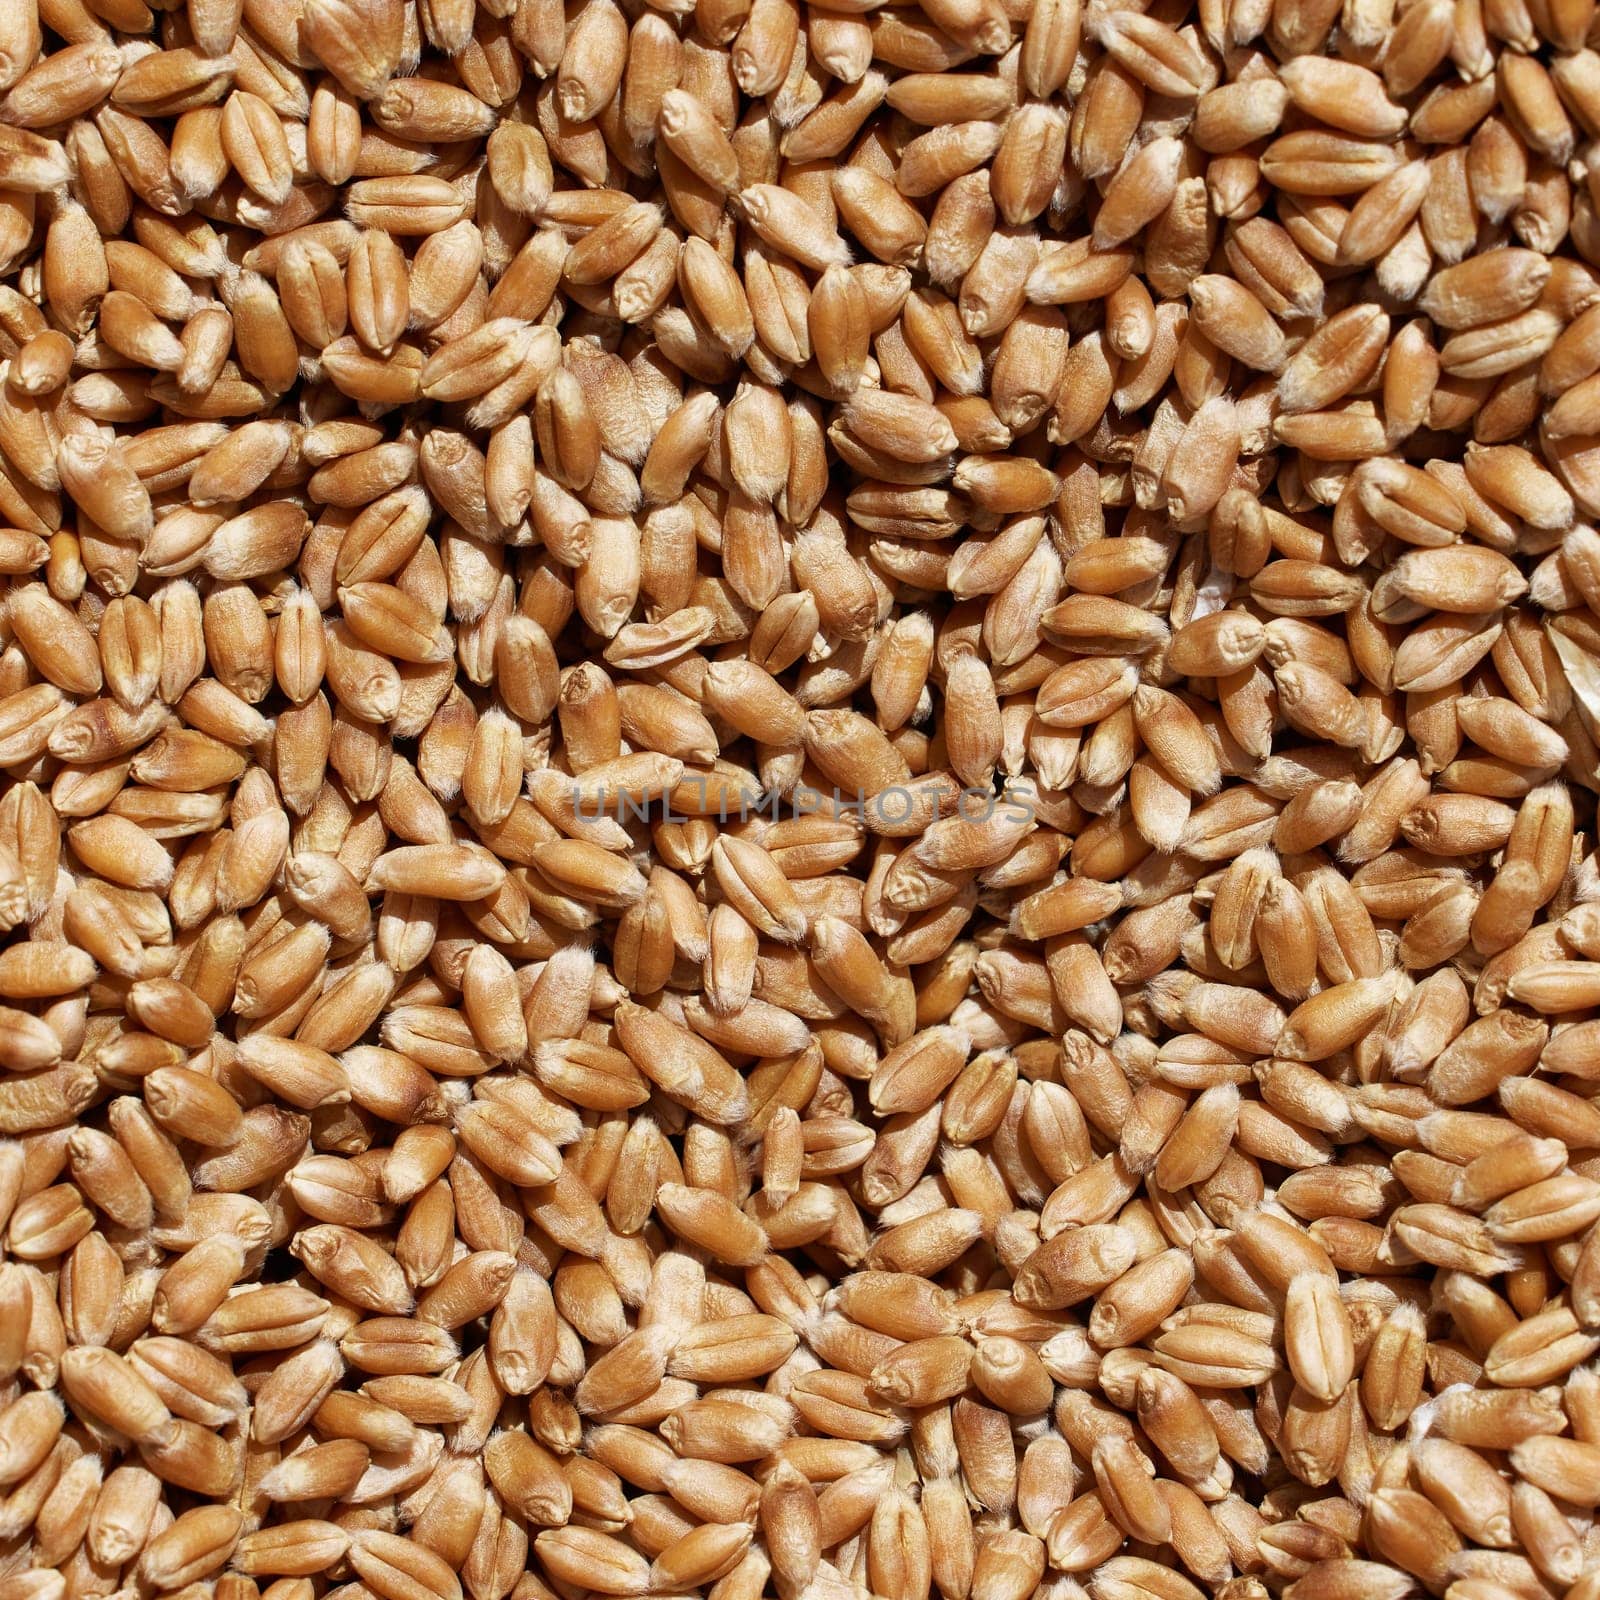 Wheat grains close-up view. Wheat grains background. Dry ripe wheat grains. Preparation for Agricultural season. Preparation of seeds for sowing. Agricultural background.